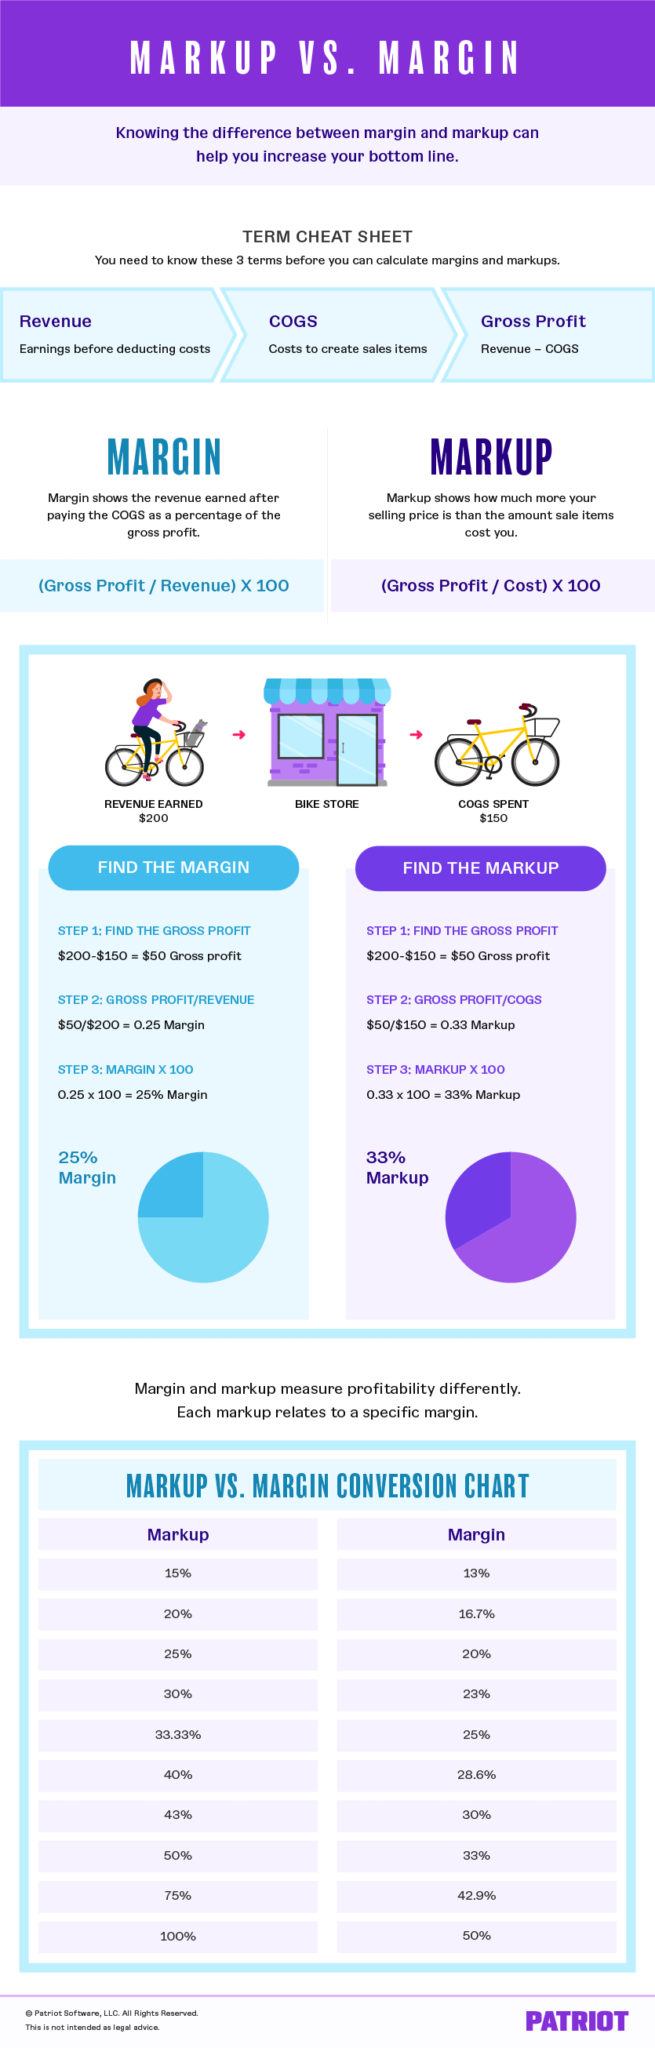 Margin vs. Markup Chart & Infographic Calculations & Beyond